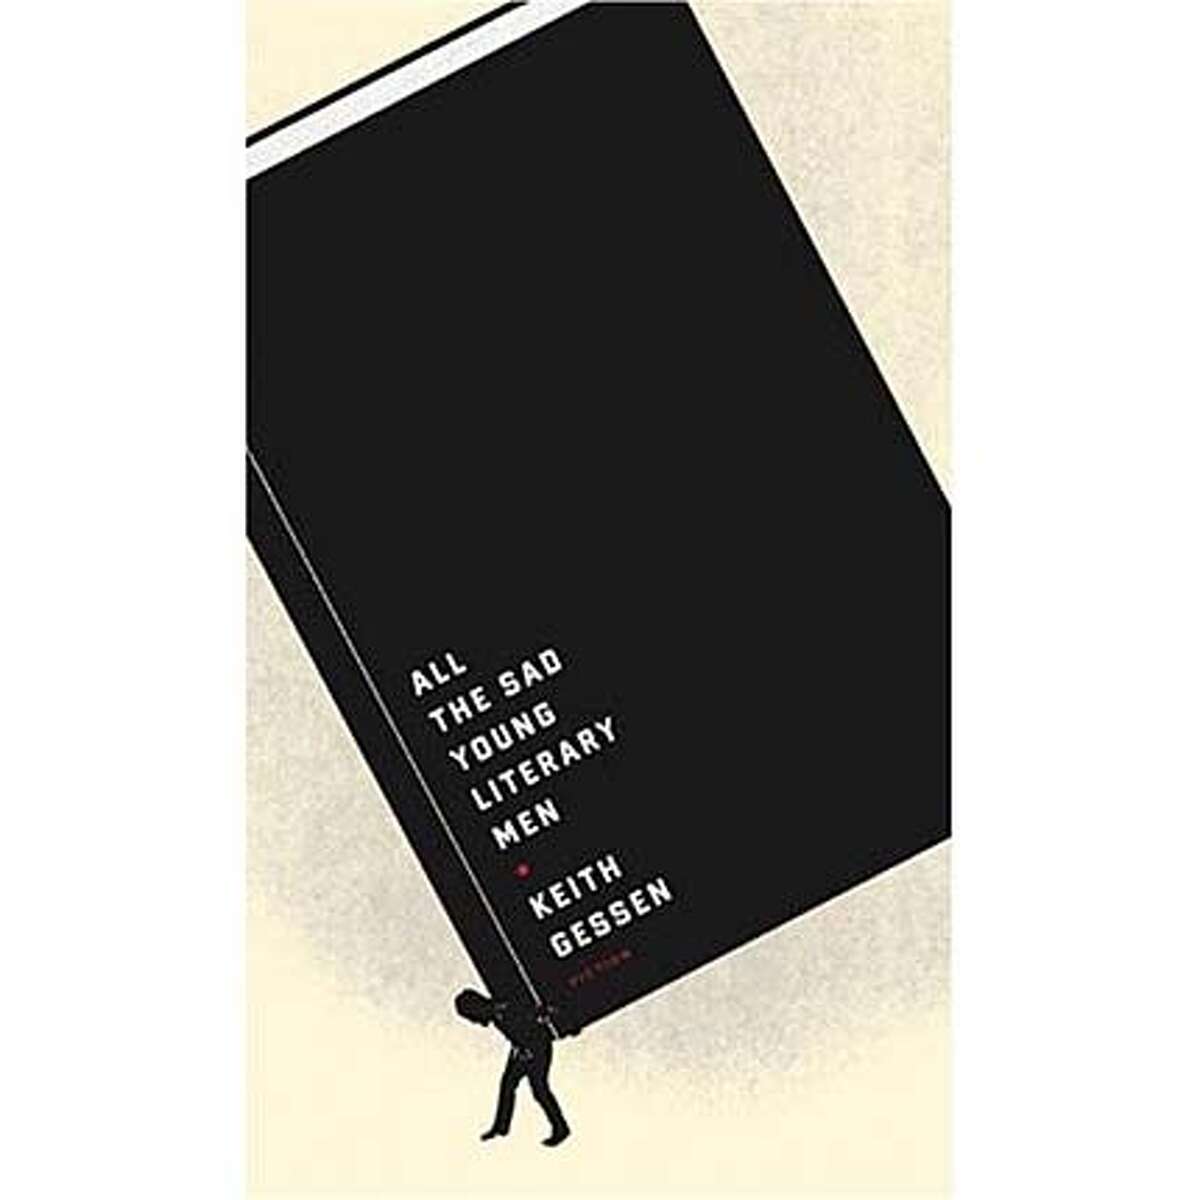 "All the Sad Young Literary Men" by Keith Gessen